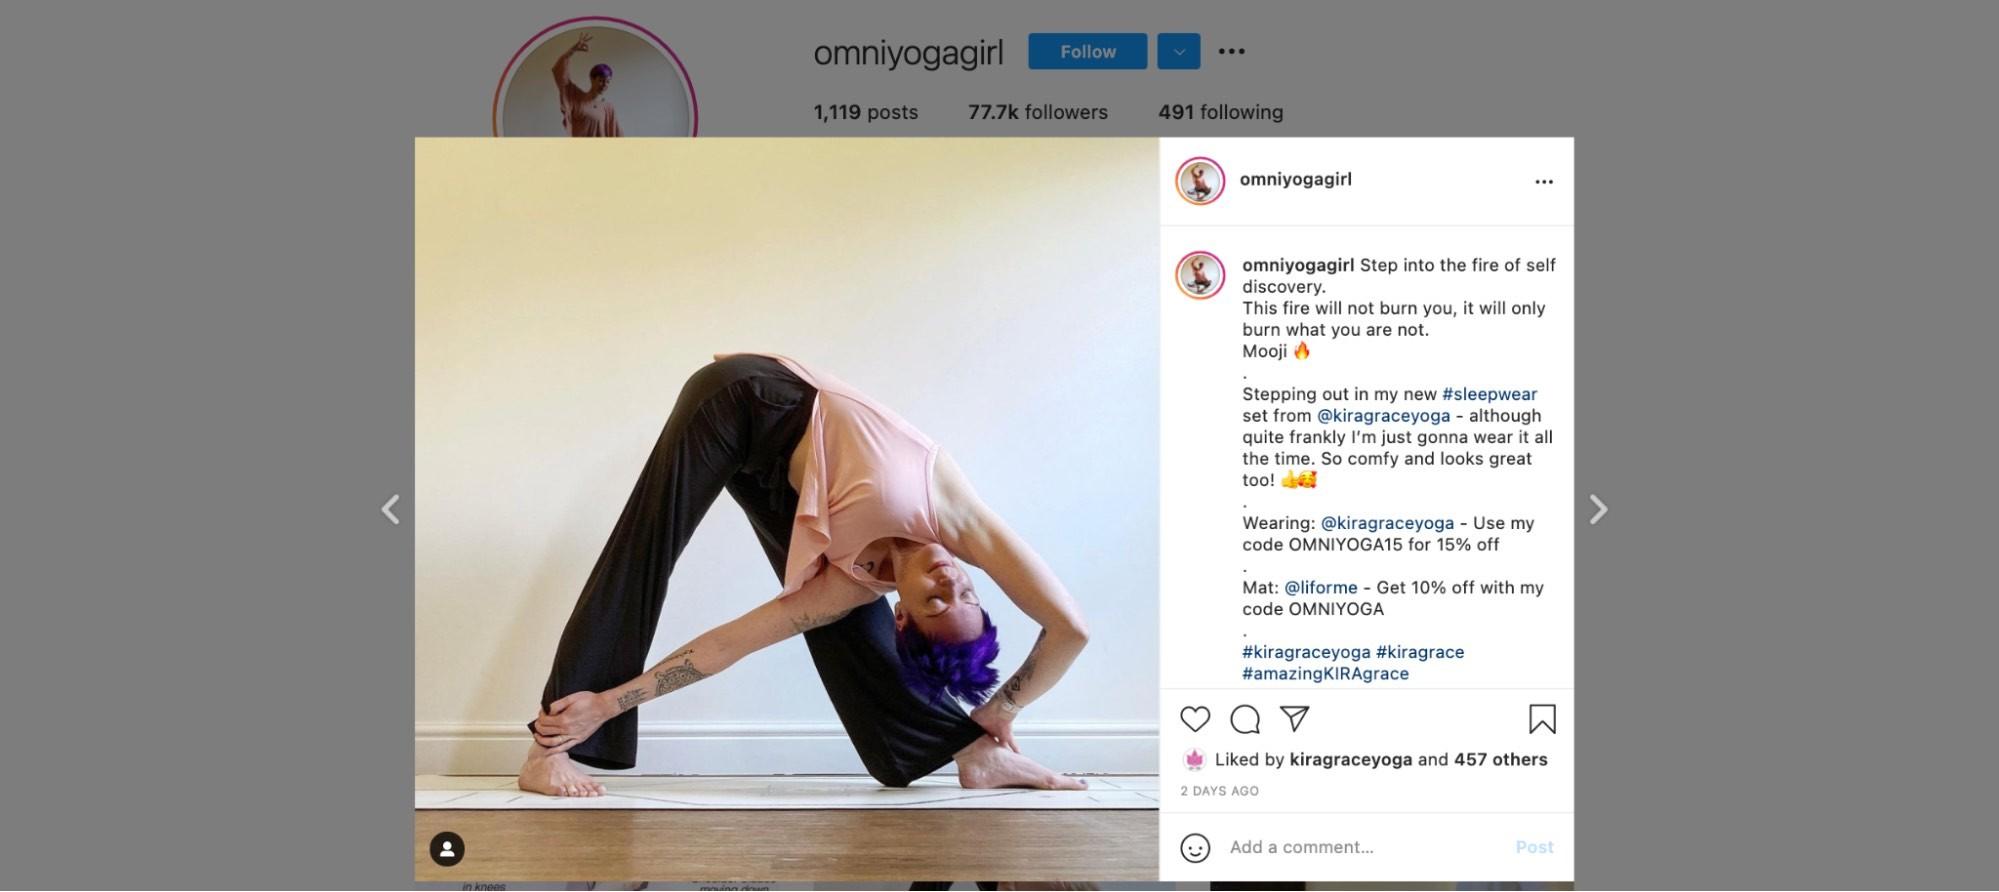 Yoga Influencer's Instagram post featuring KiraGrace apparel and a discount code in the caption